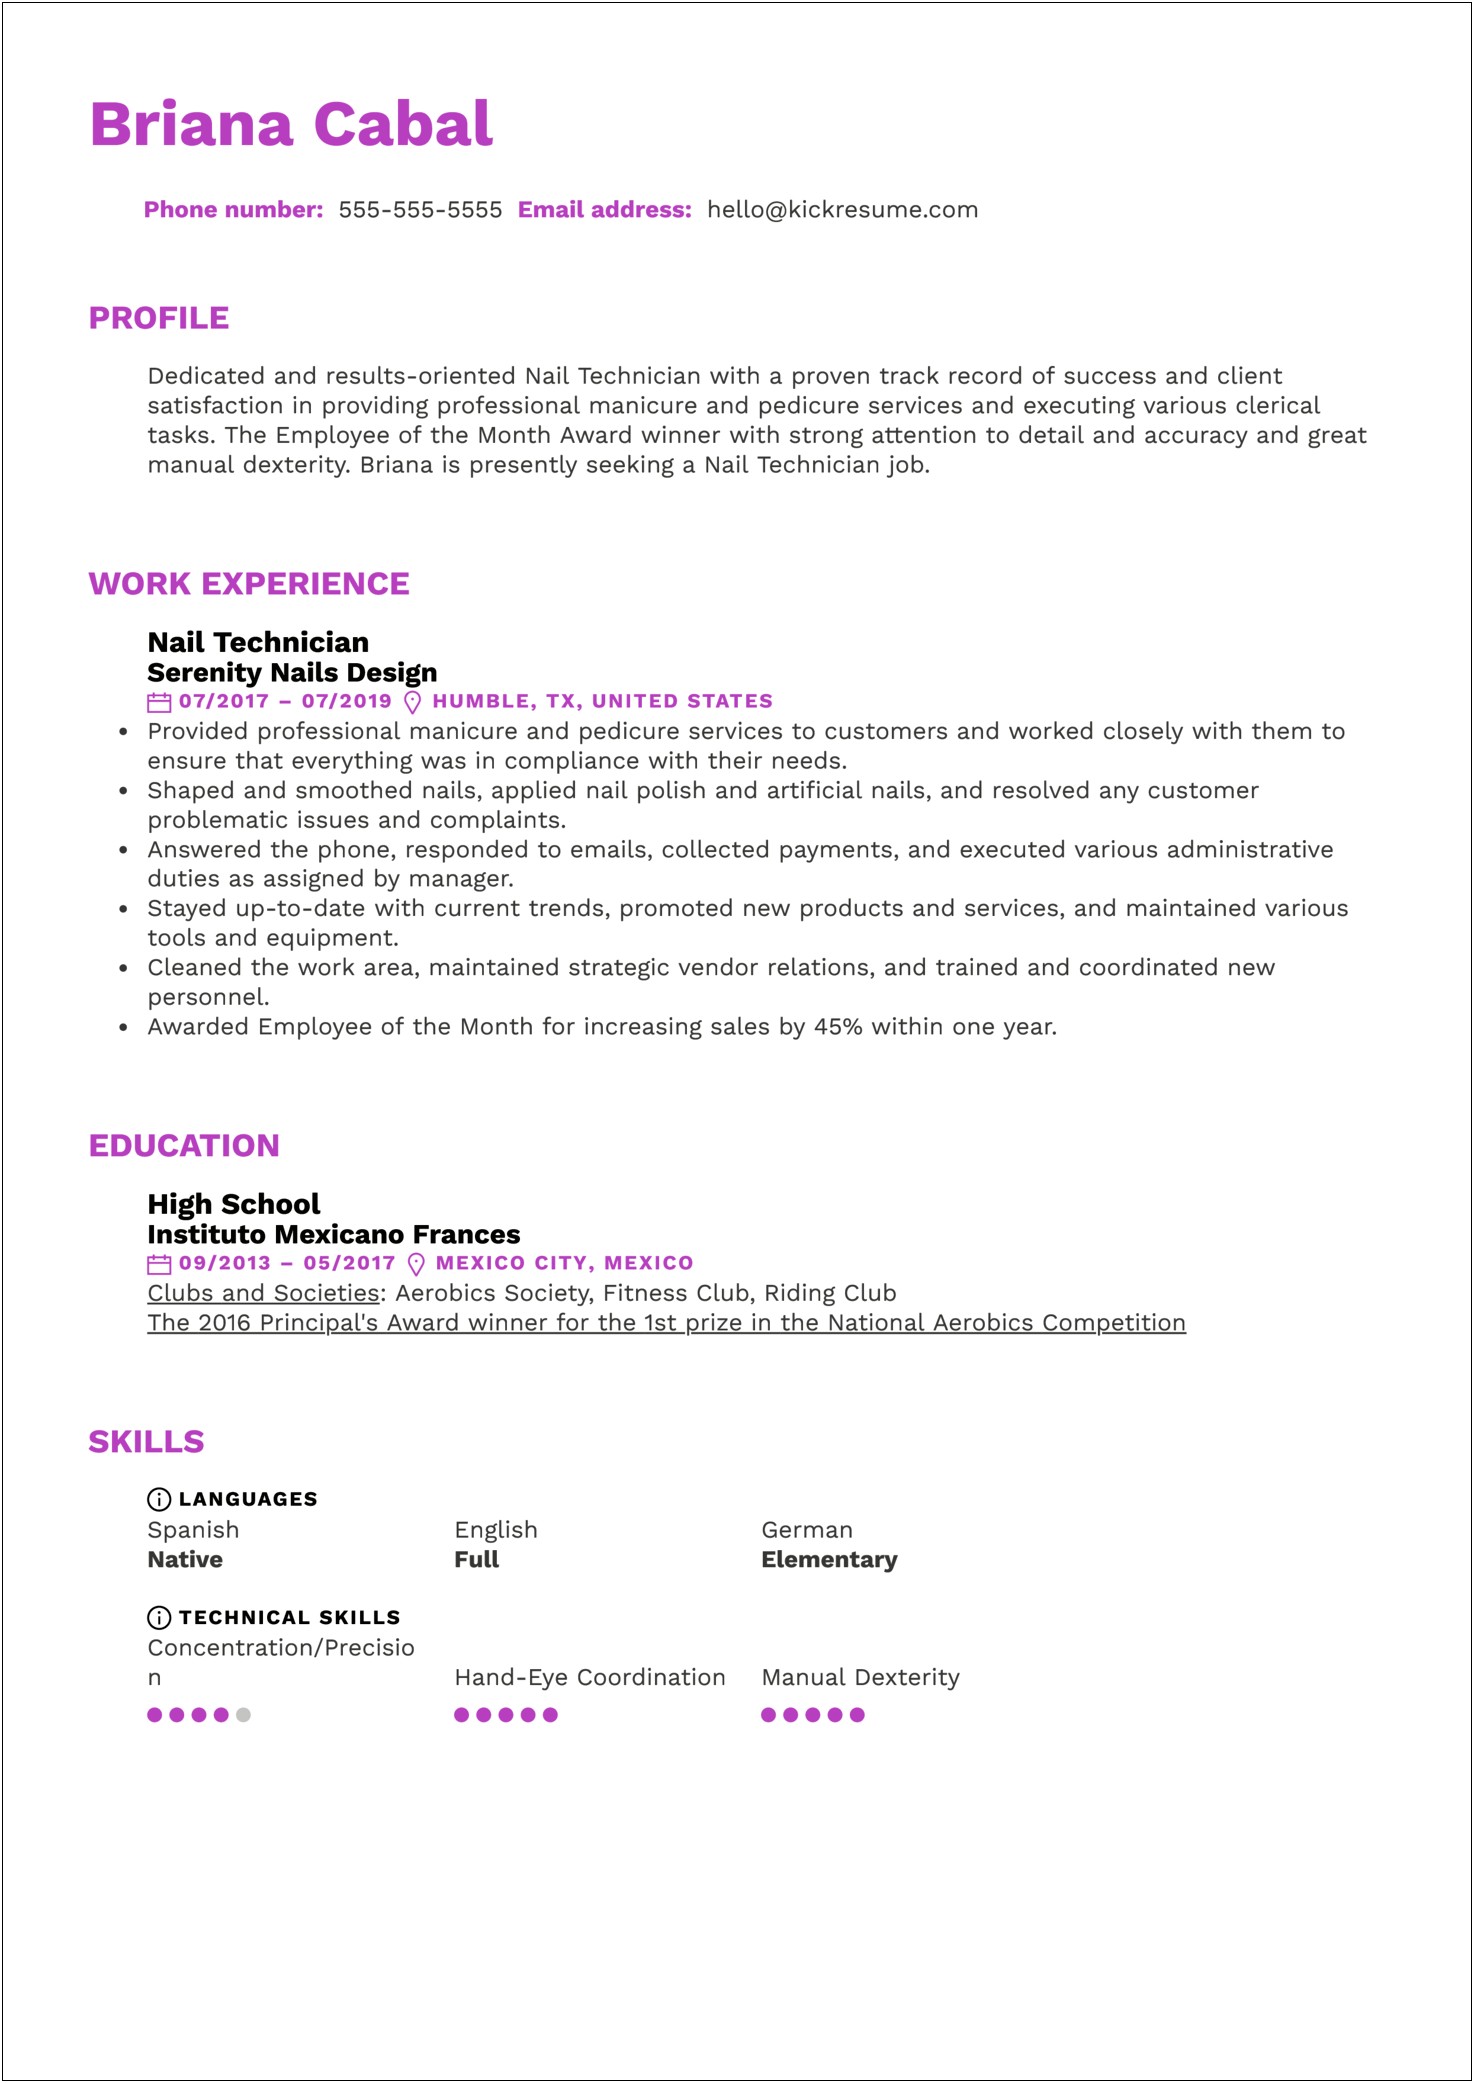 Resume Layouts For Tech Jobs